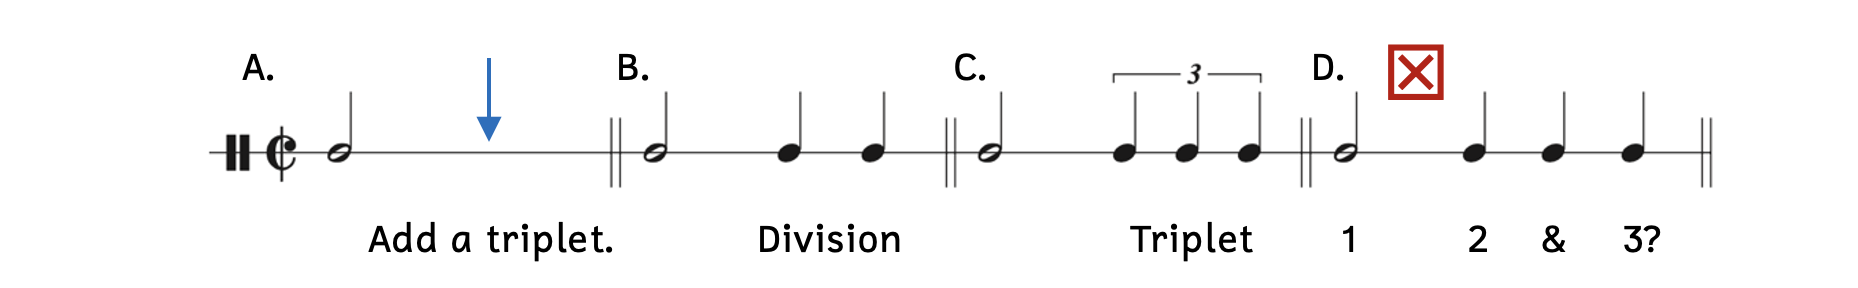 A shows a blank where a triplet should be added in the time signature of cut time. B shows that the division of the half note is two quarter notes. C shows the two quarter notes being substituted for three quarter note triplets. D shows how not adding the 3 for the triplet creates problems.